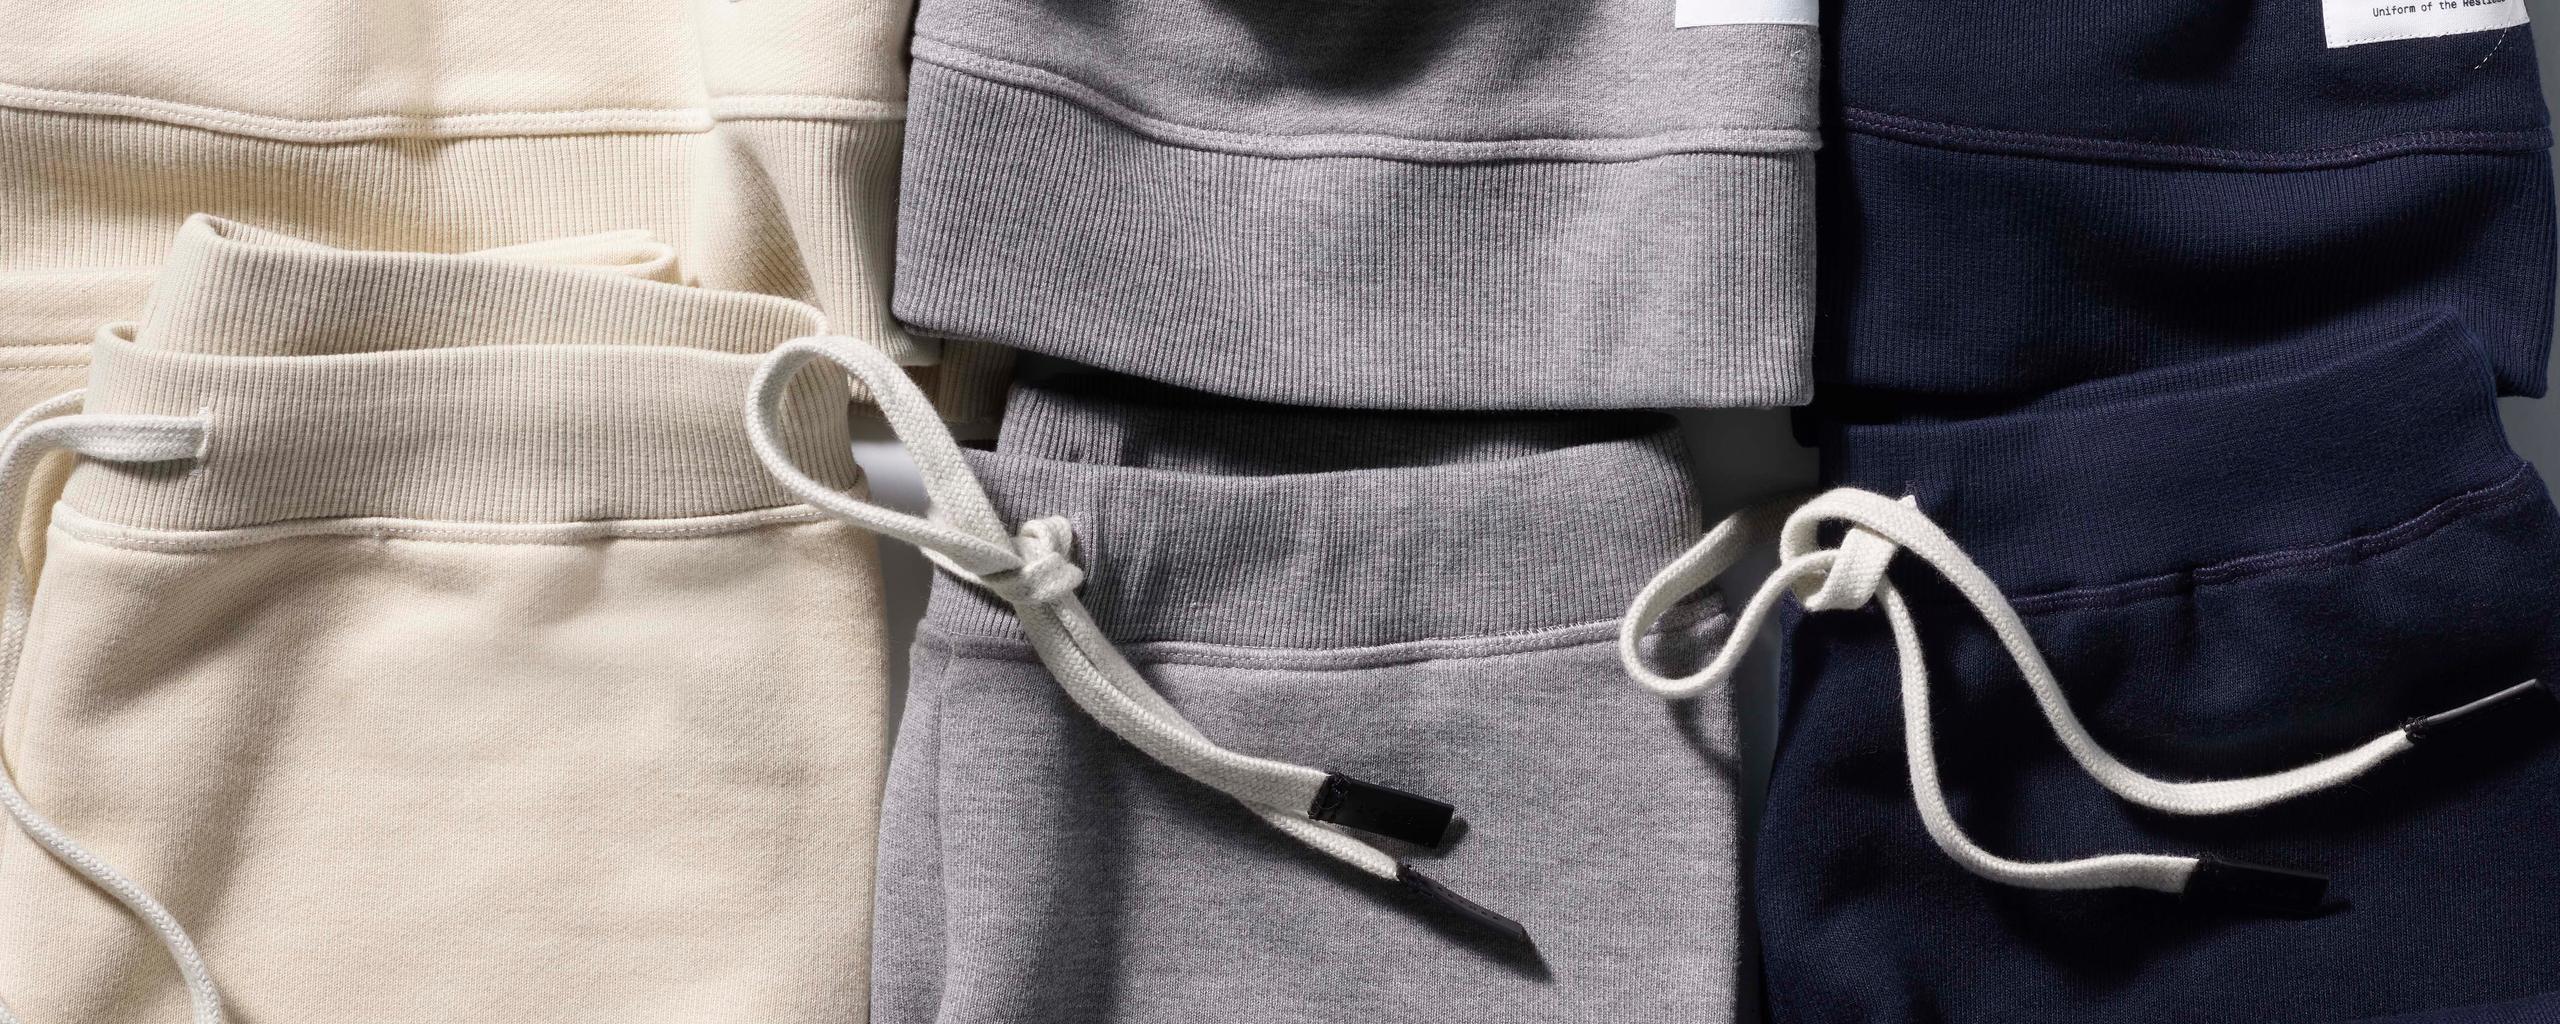 Group of Foundation sweatshirts and sweatpants laid down together in still-life photo